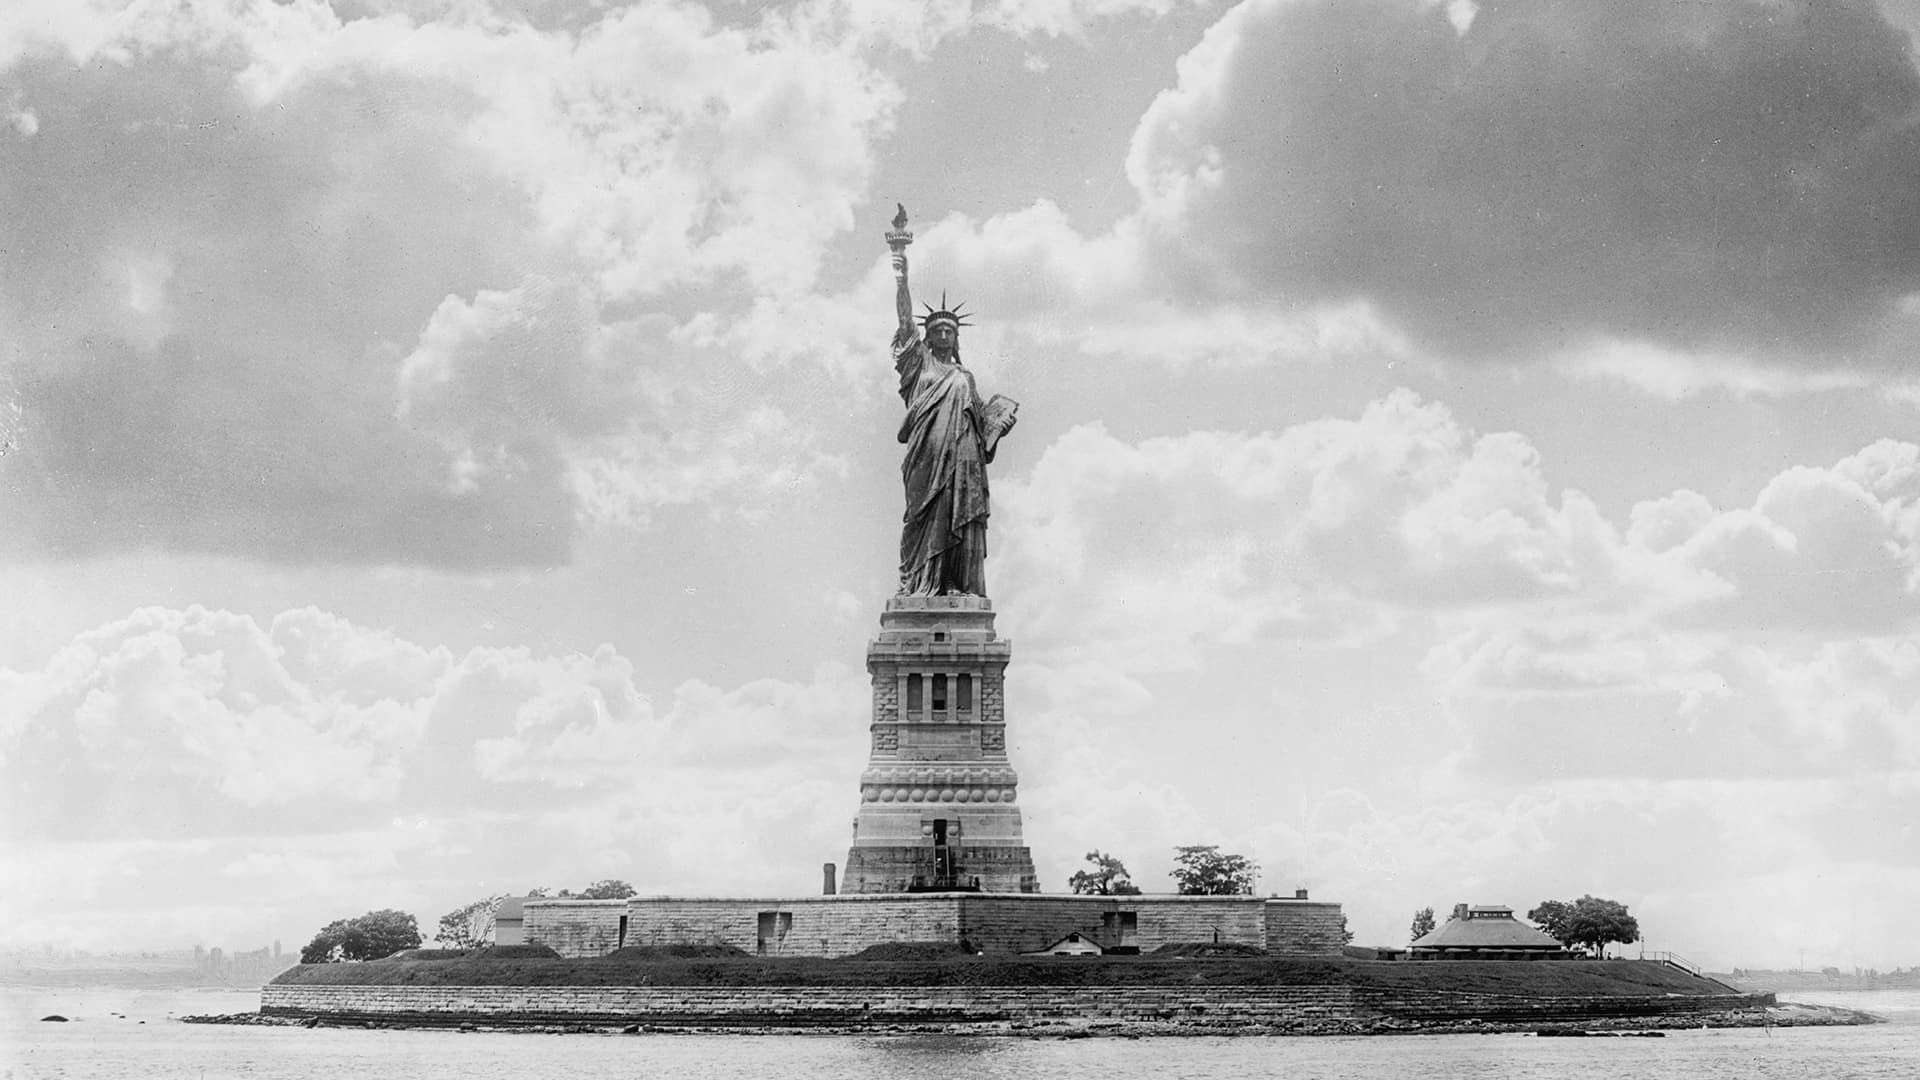 The Statue of Liberty background